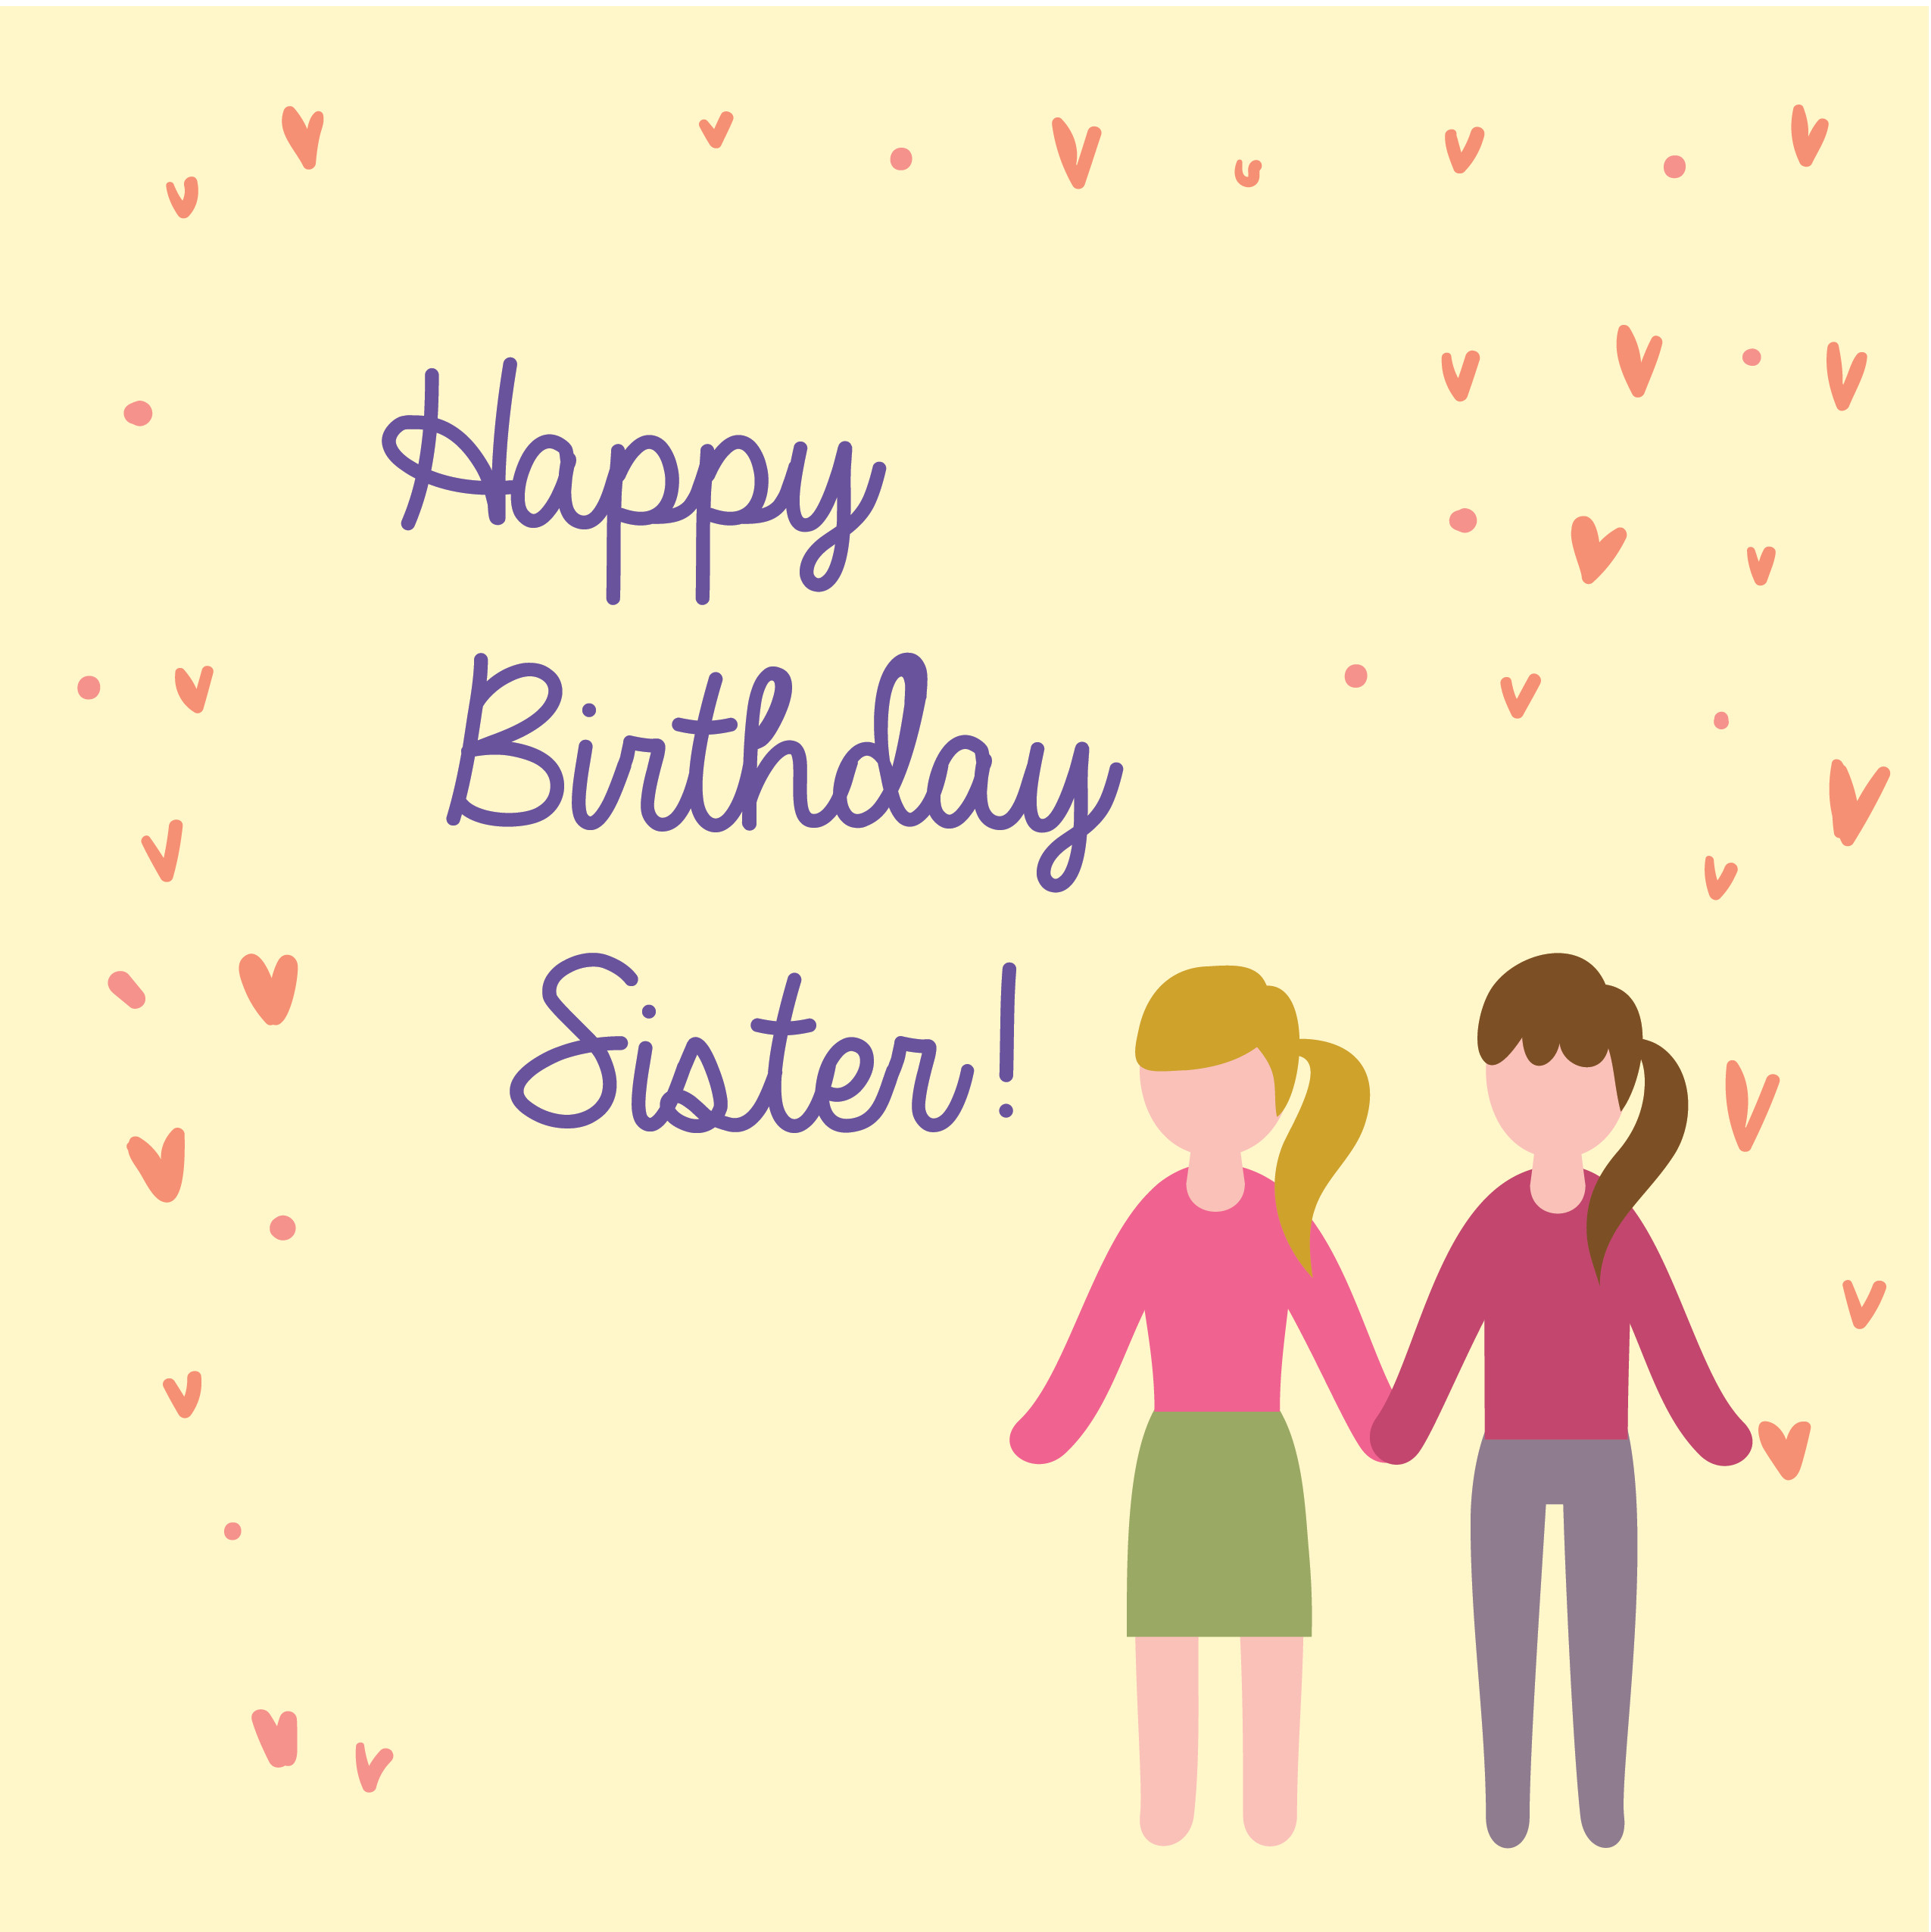 Happy Birthday Wishes To Sister
 200 Happy Birthday Wishes & Quotes with Funny & Cute